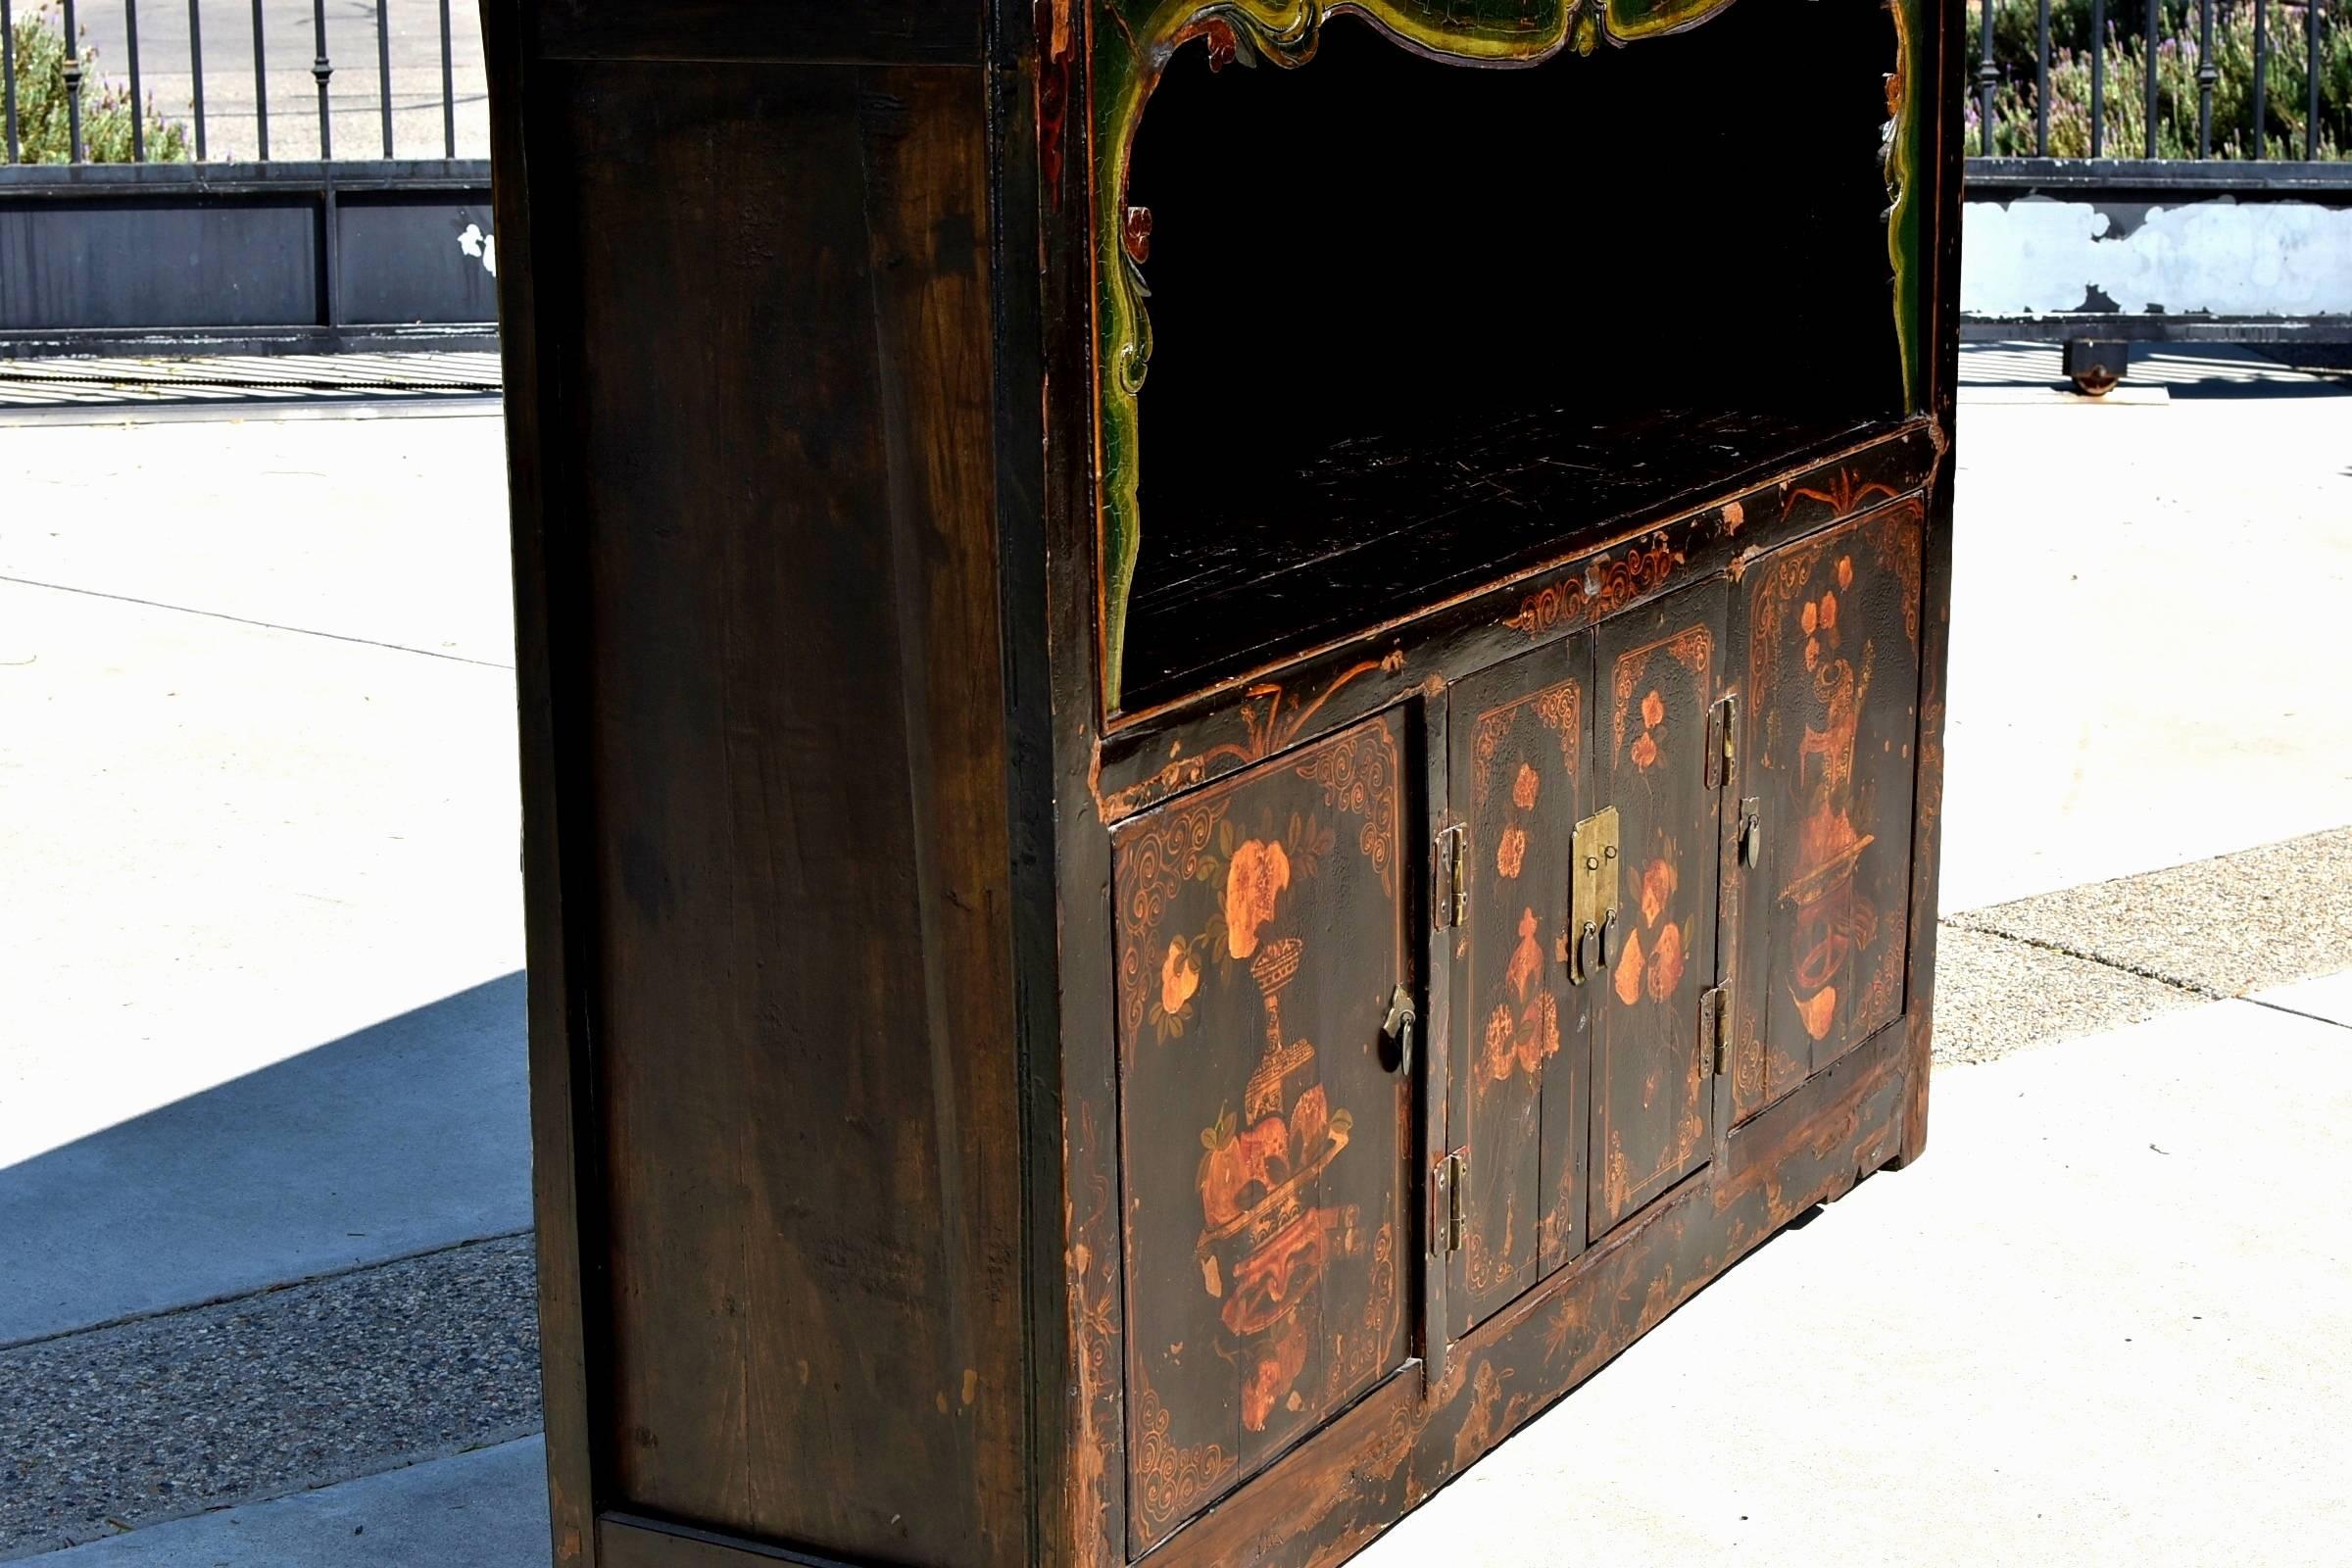 A beautiful Chinese scholar's chest with an open light feature and hand-painted images. Historically used to store books and scrolls, the top section has a hand-carved border gracefully outlining the open compartment. The lower half of the chest is